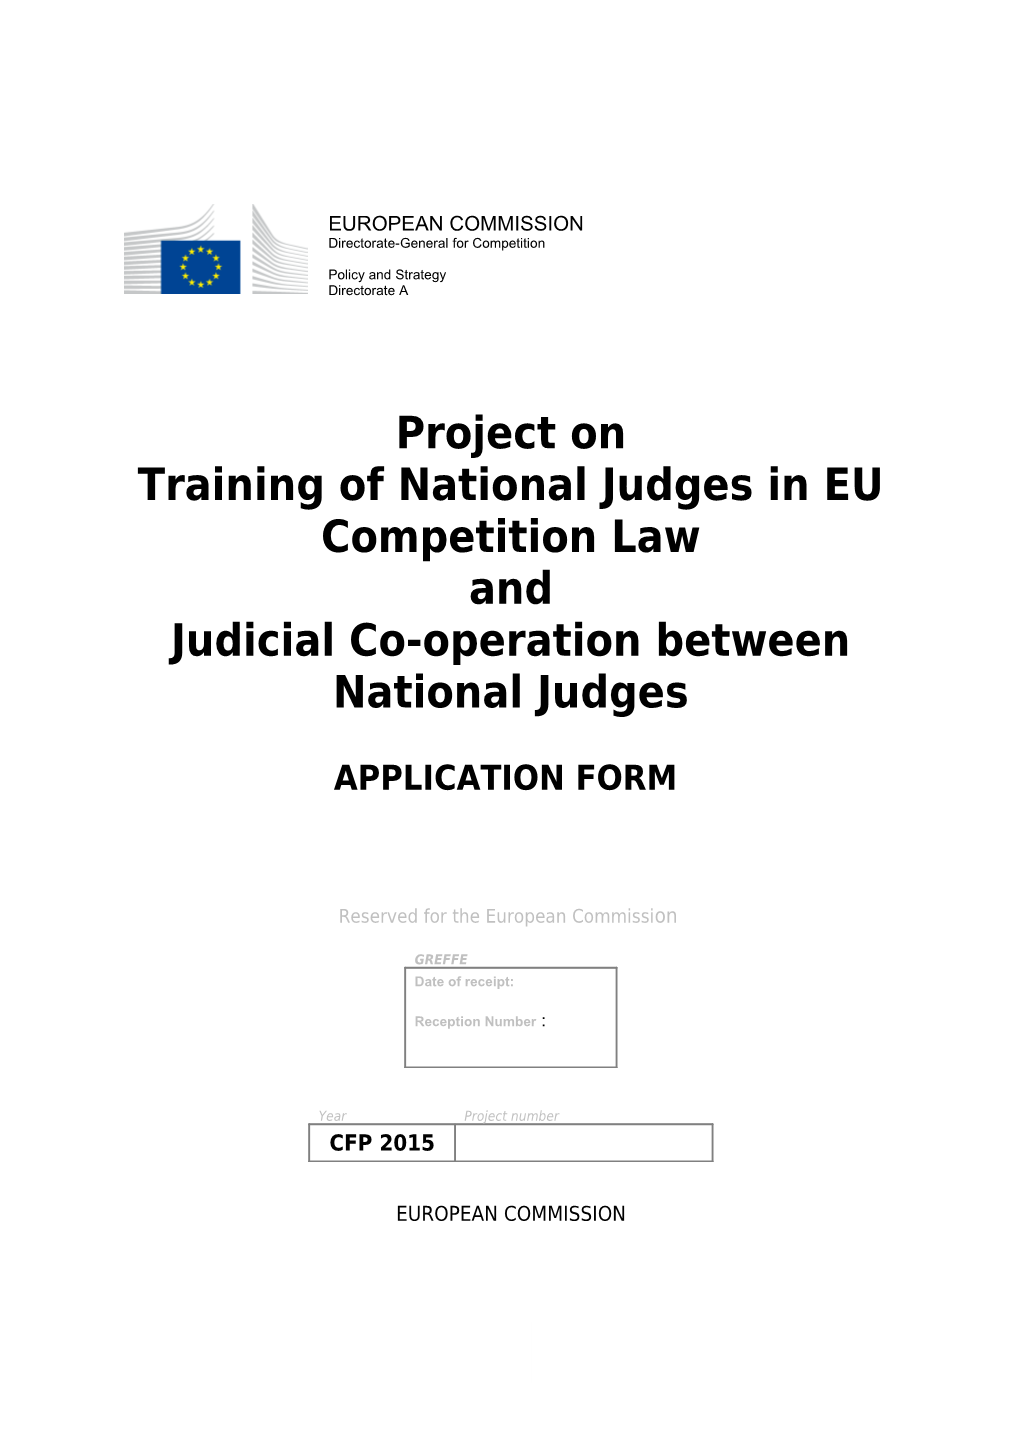 Training of National Judges in EU Competition Law